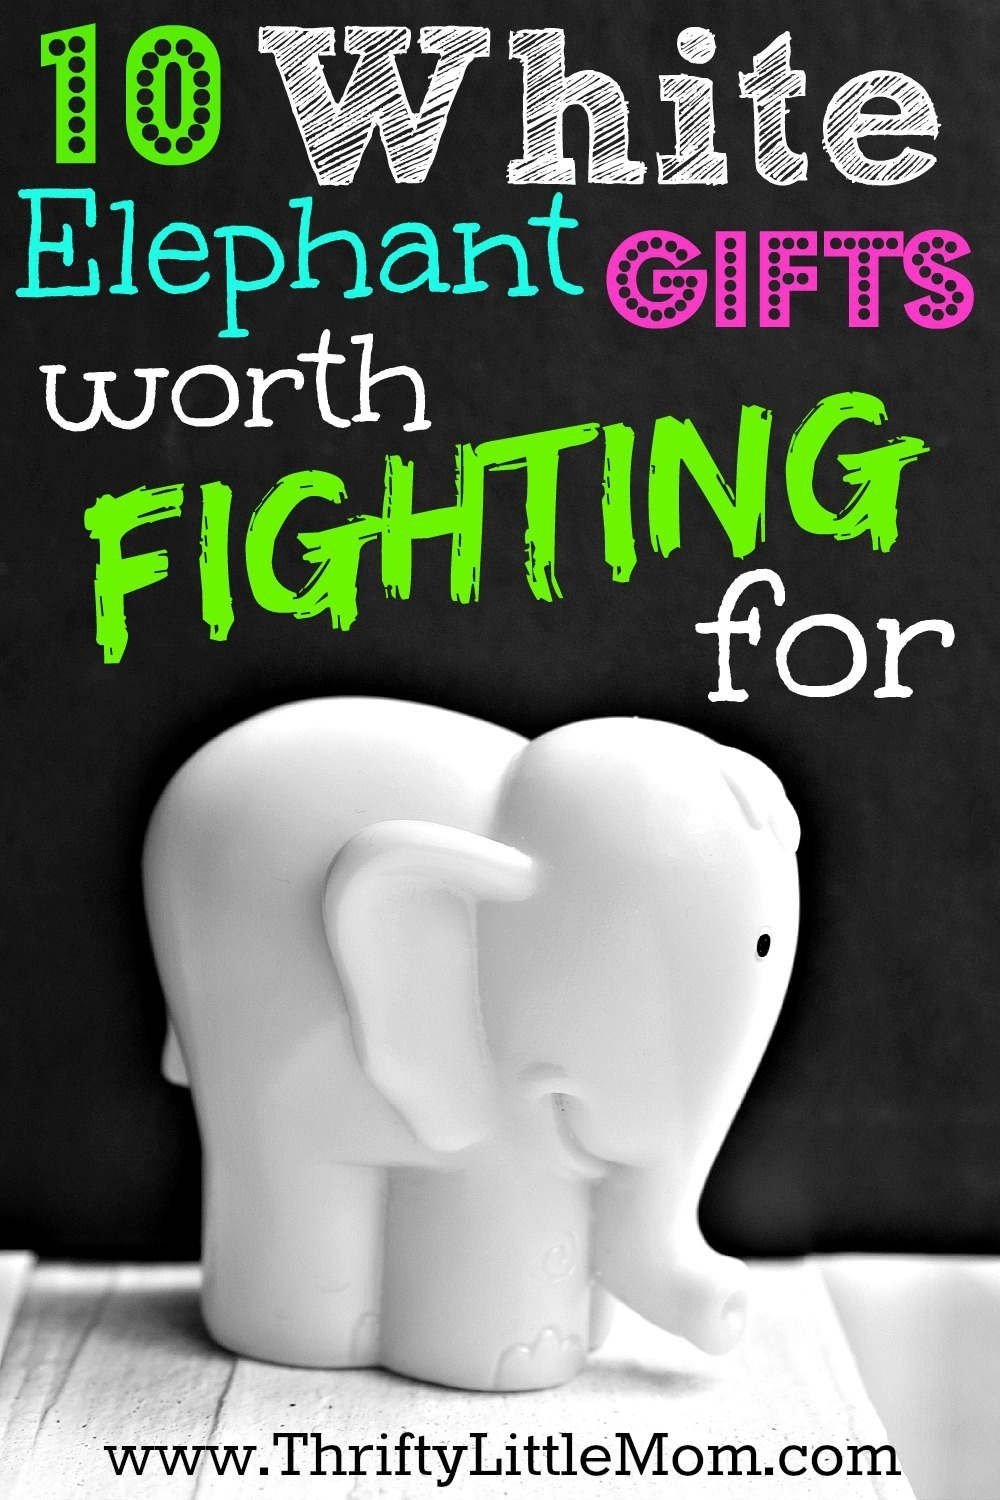 10 Great White Elephant Gift Ideas For Work white elephant gifts worth fighting for yankee swap ideas white 5 2022